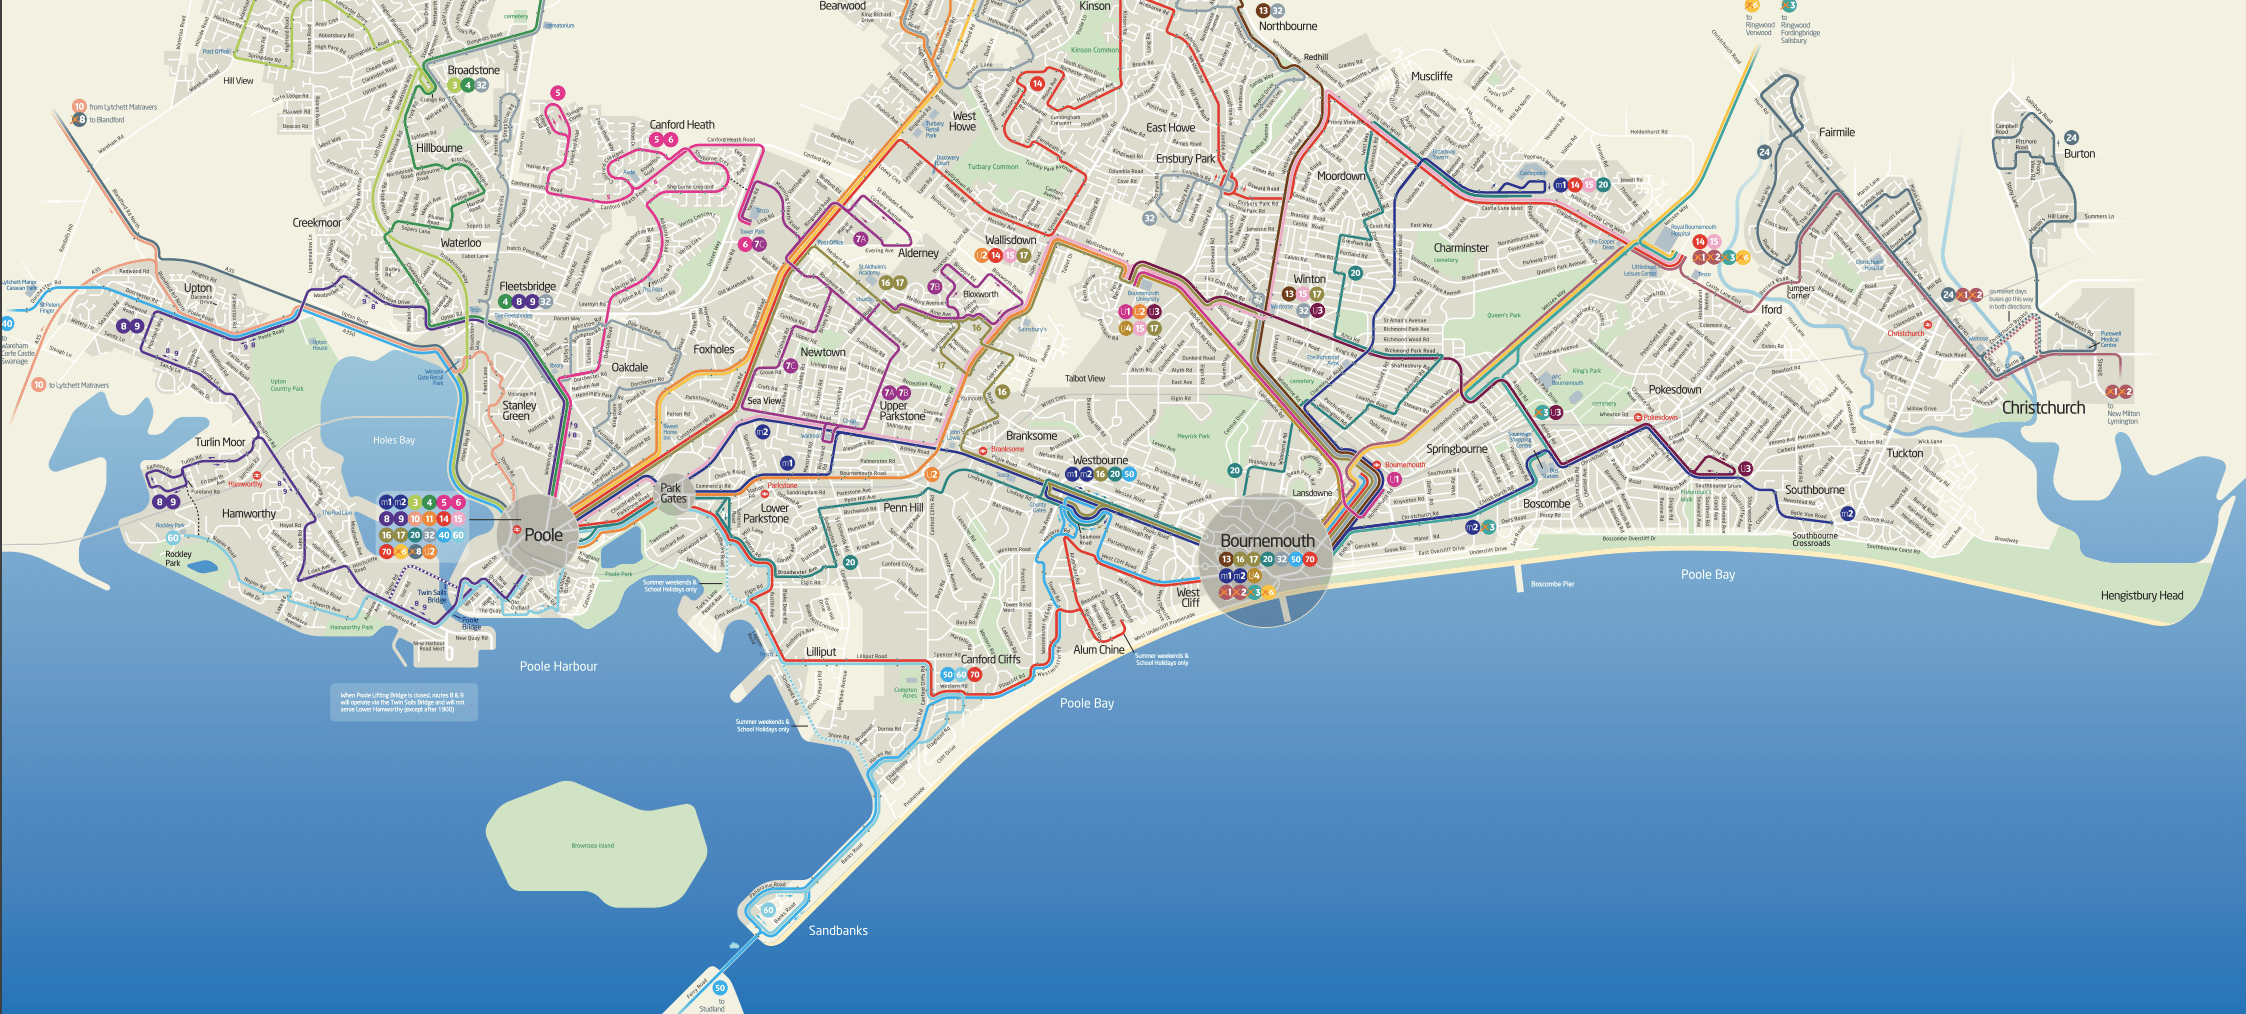 network map showing routes in Bournemouth